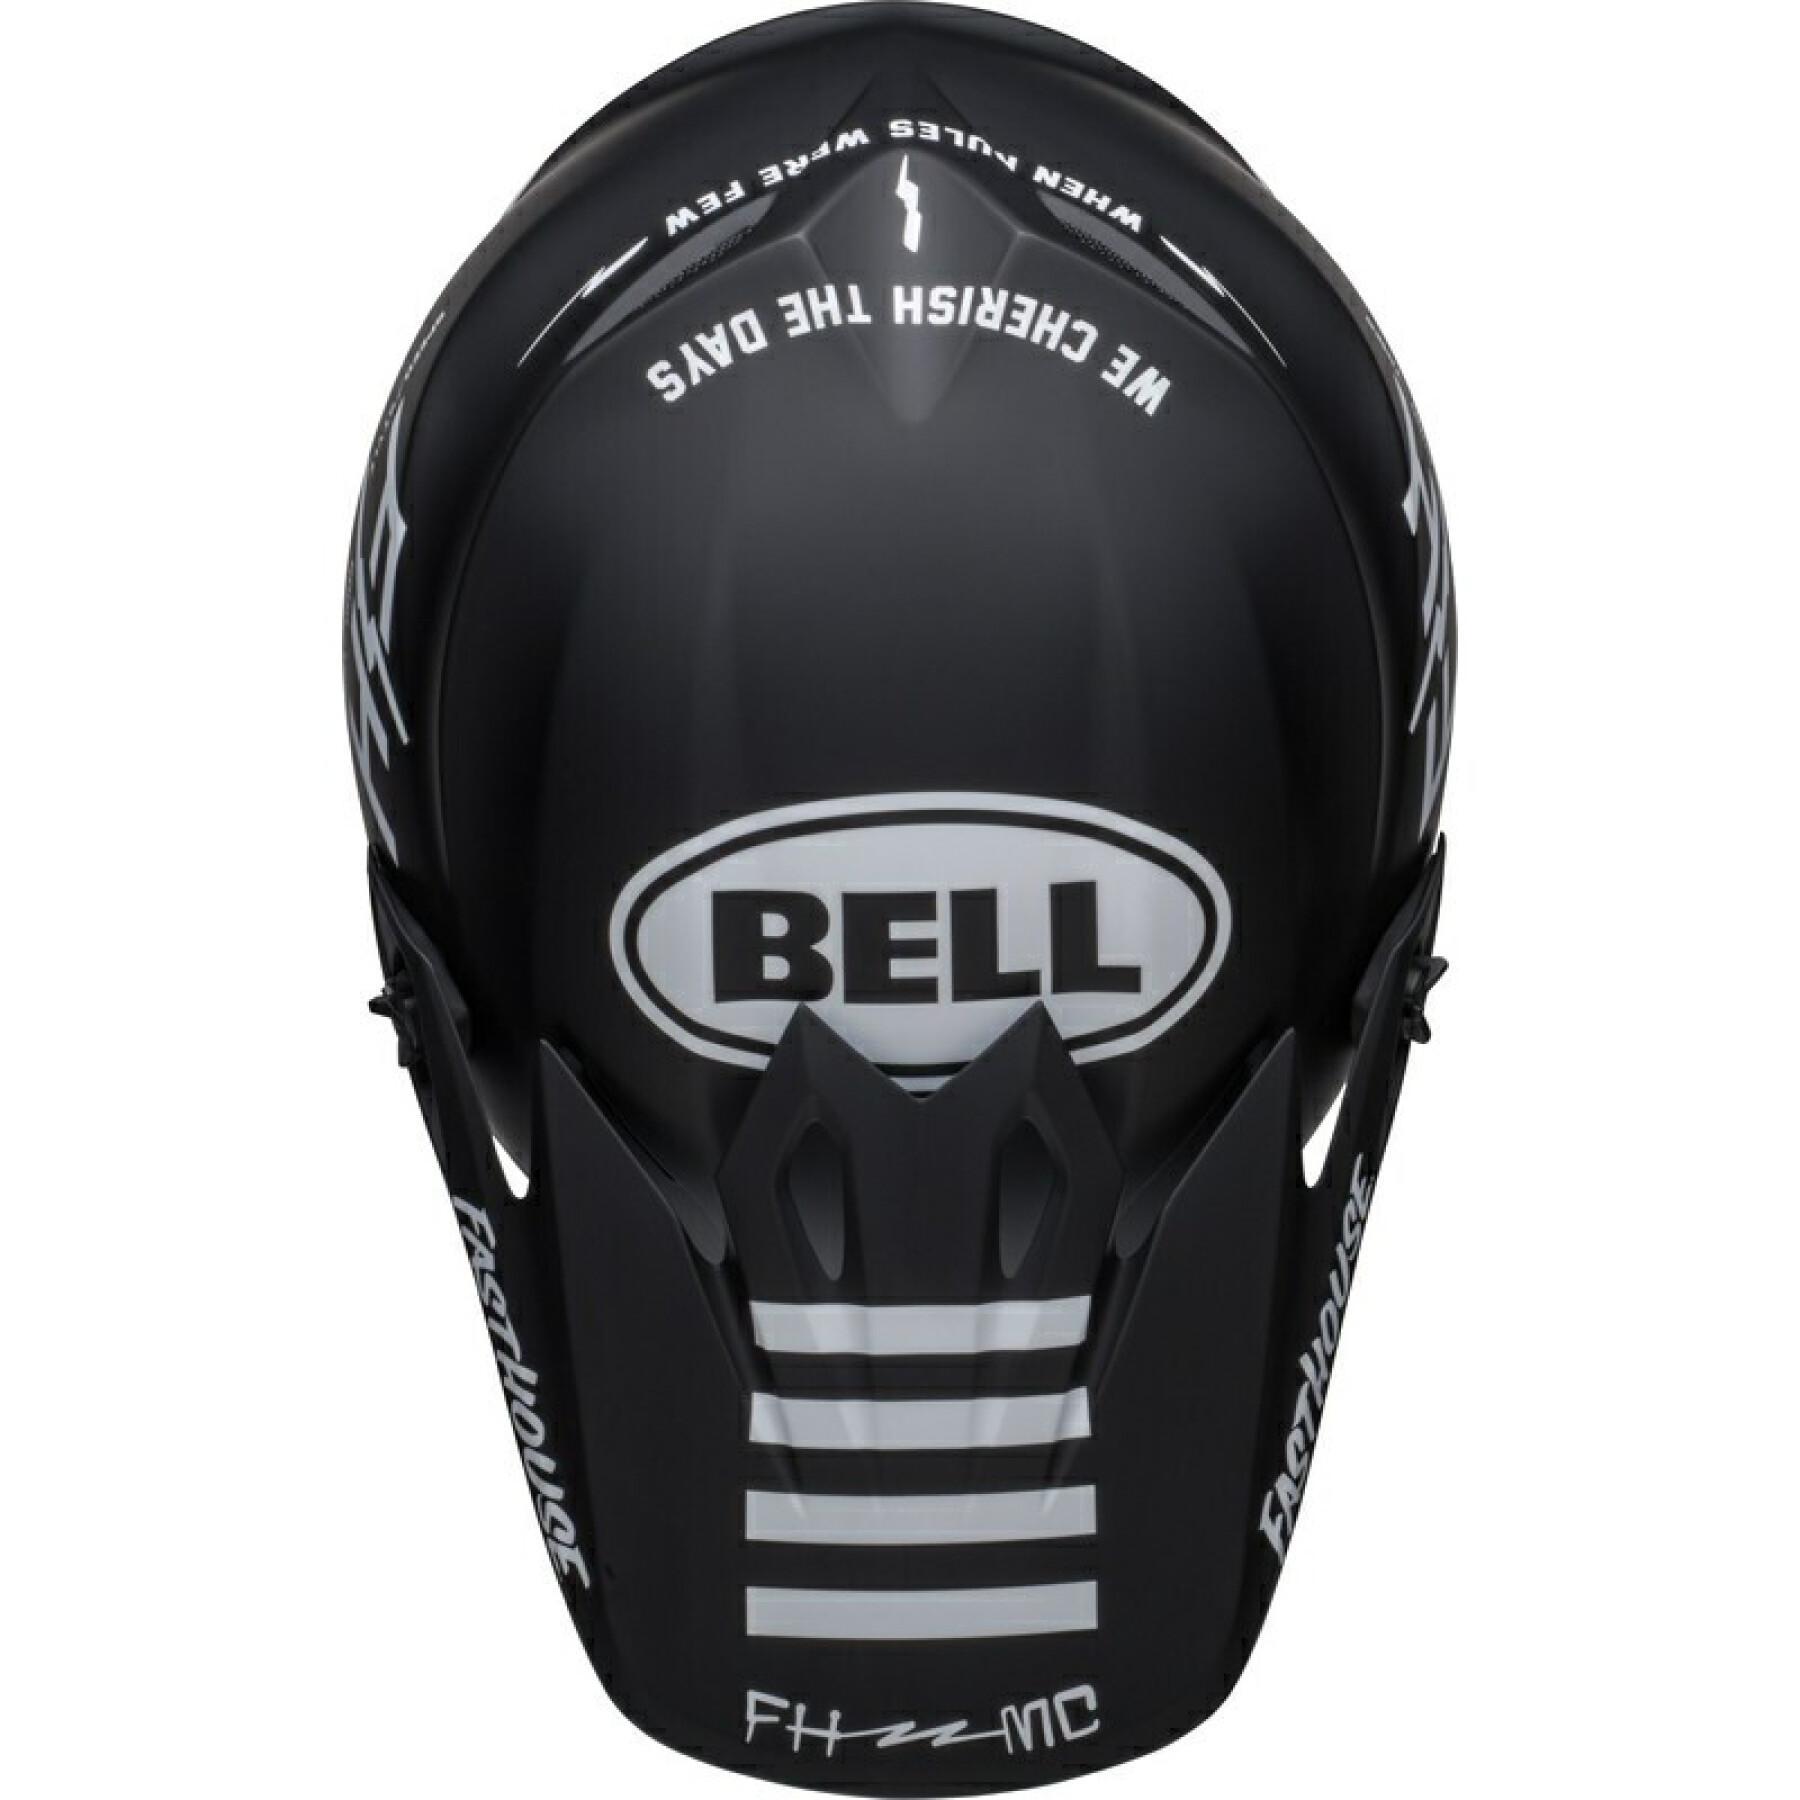 Casque moto cross Bell MX-9 Mips - Fasthouse Prospect